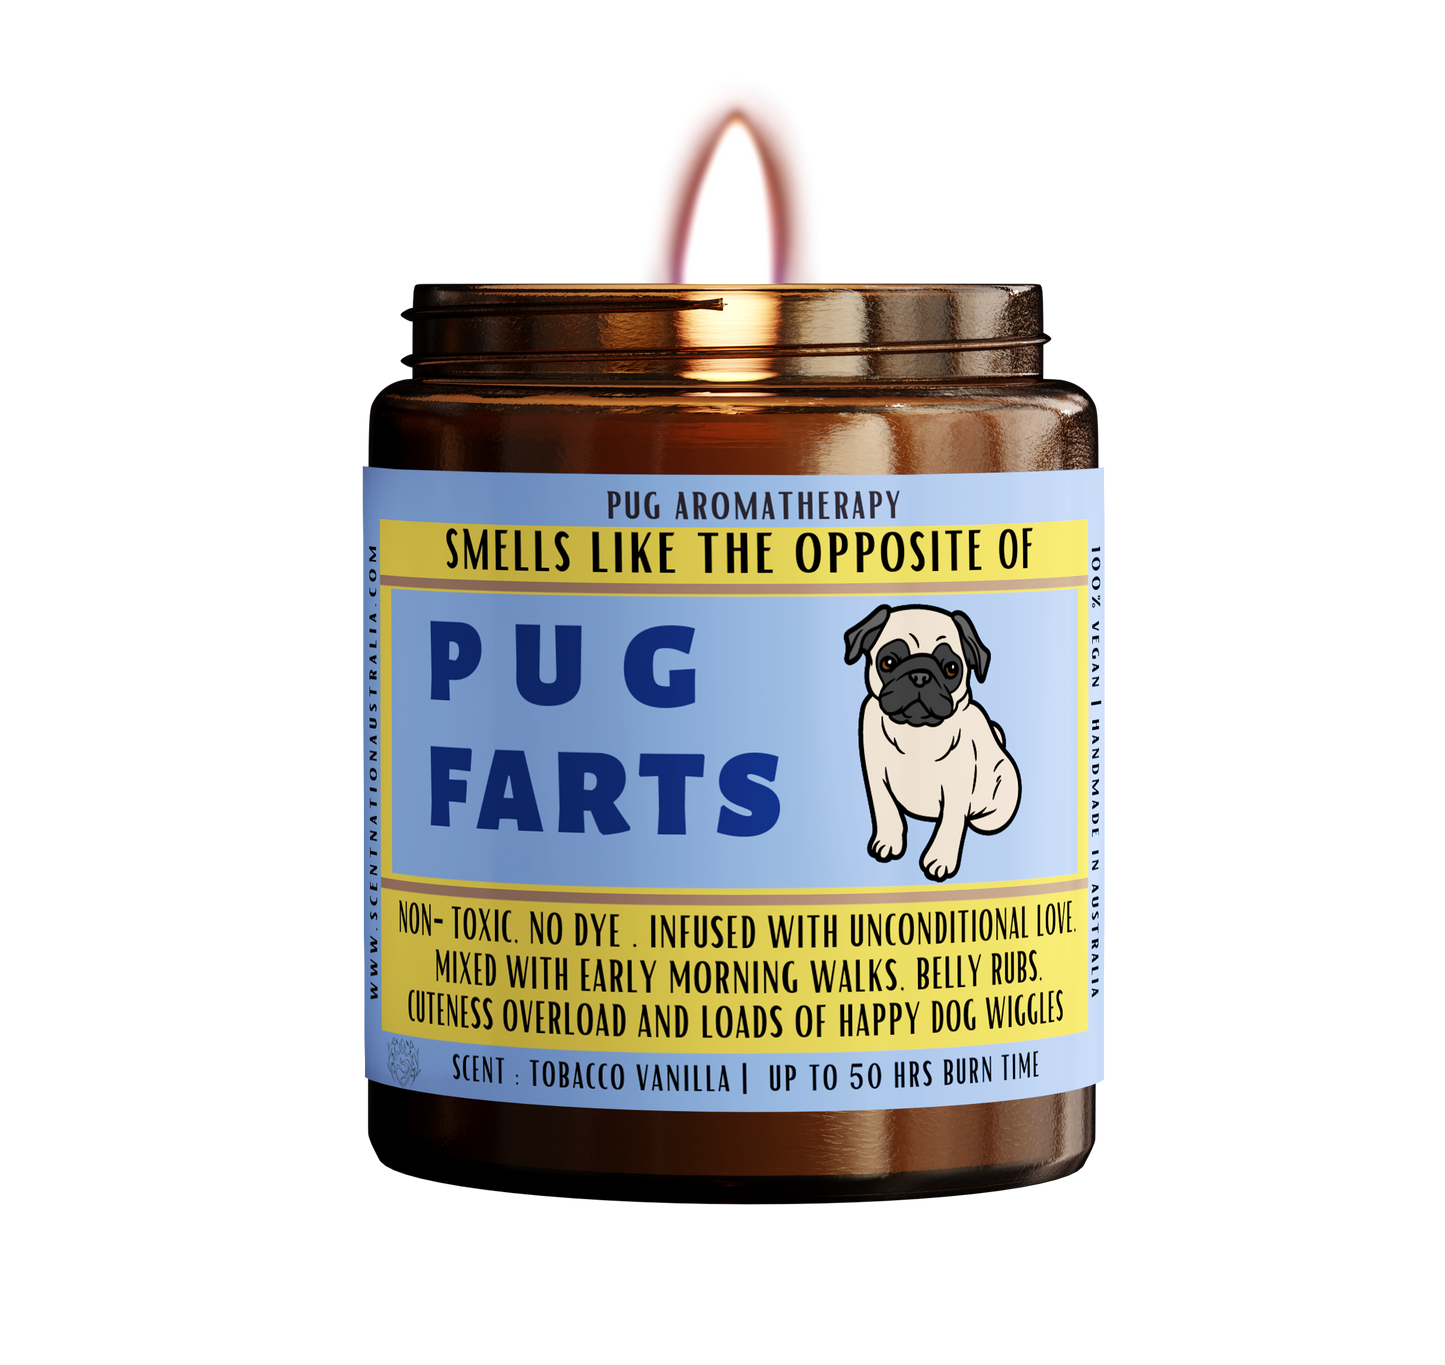 A pug puppy on a candle labeled "Smells like the opposite of a pug fart". The candle is made in Australia and is a great gift for pug lovers, new pug owners, or anyone who appreciates a dog candle that doubles as a fart extinguisher..